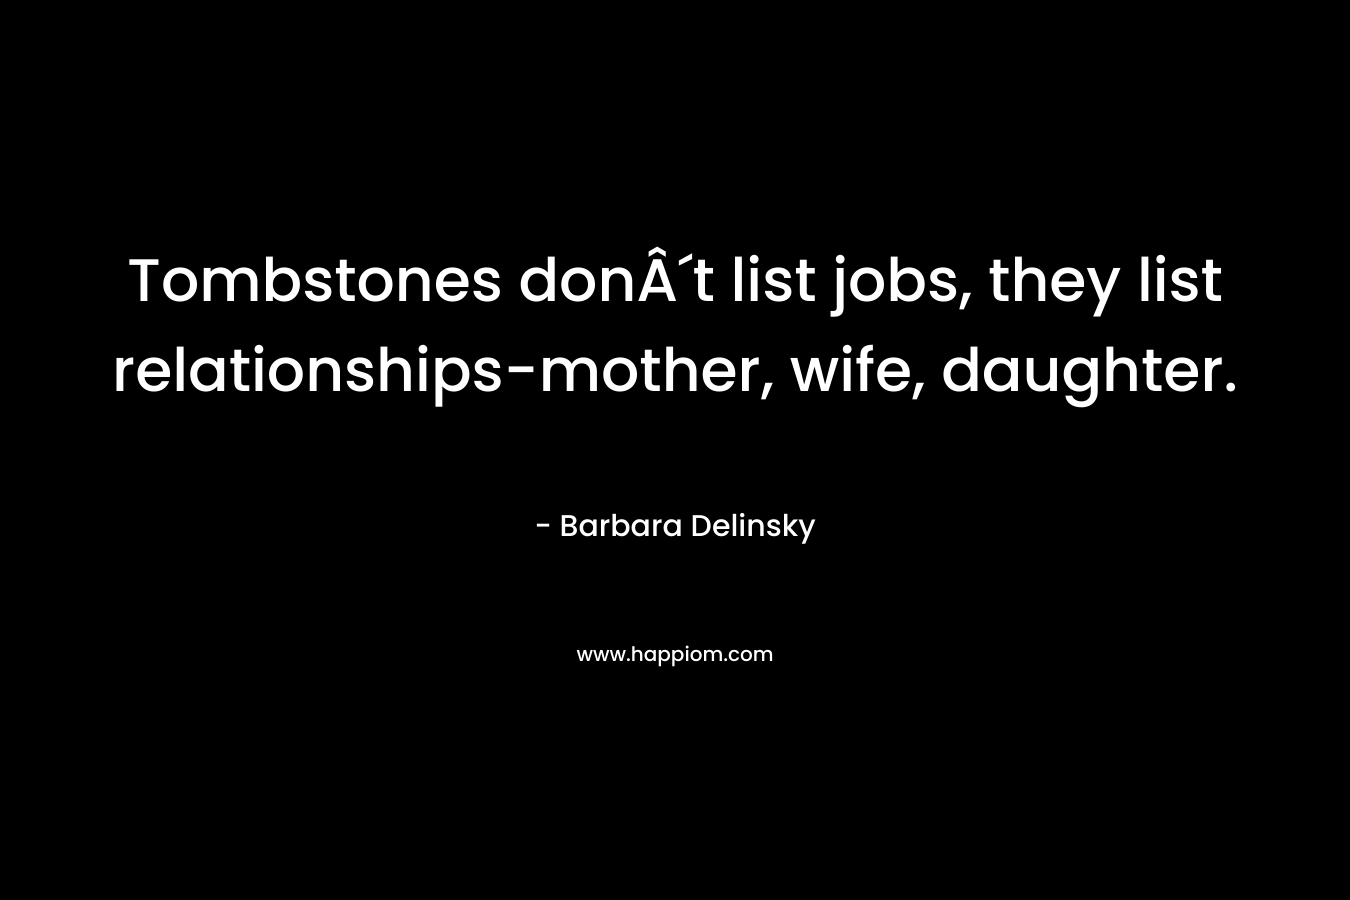 Tombstones donÂ´t list jobs, they list relationships-mother, wife, daughter.